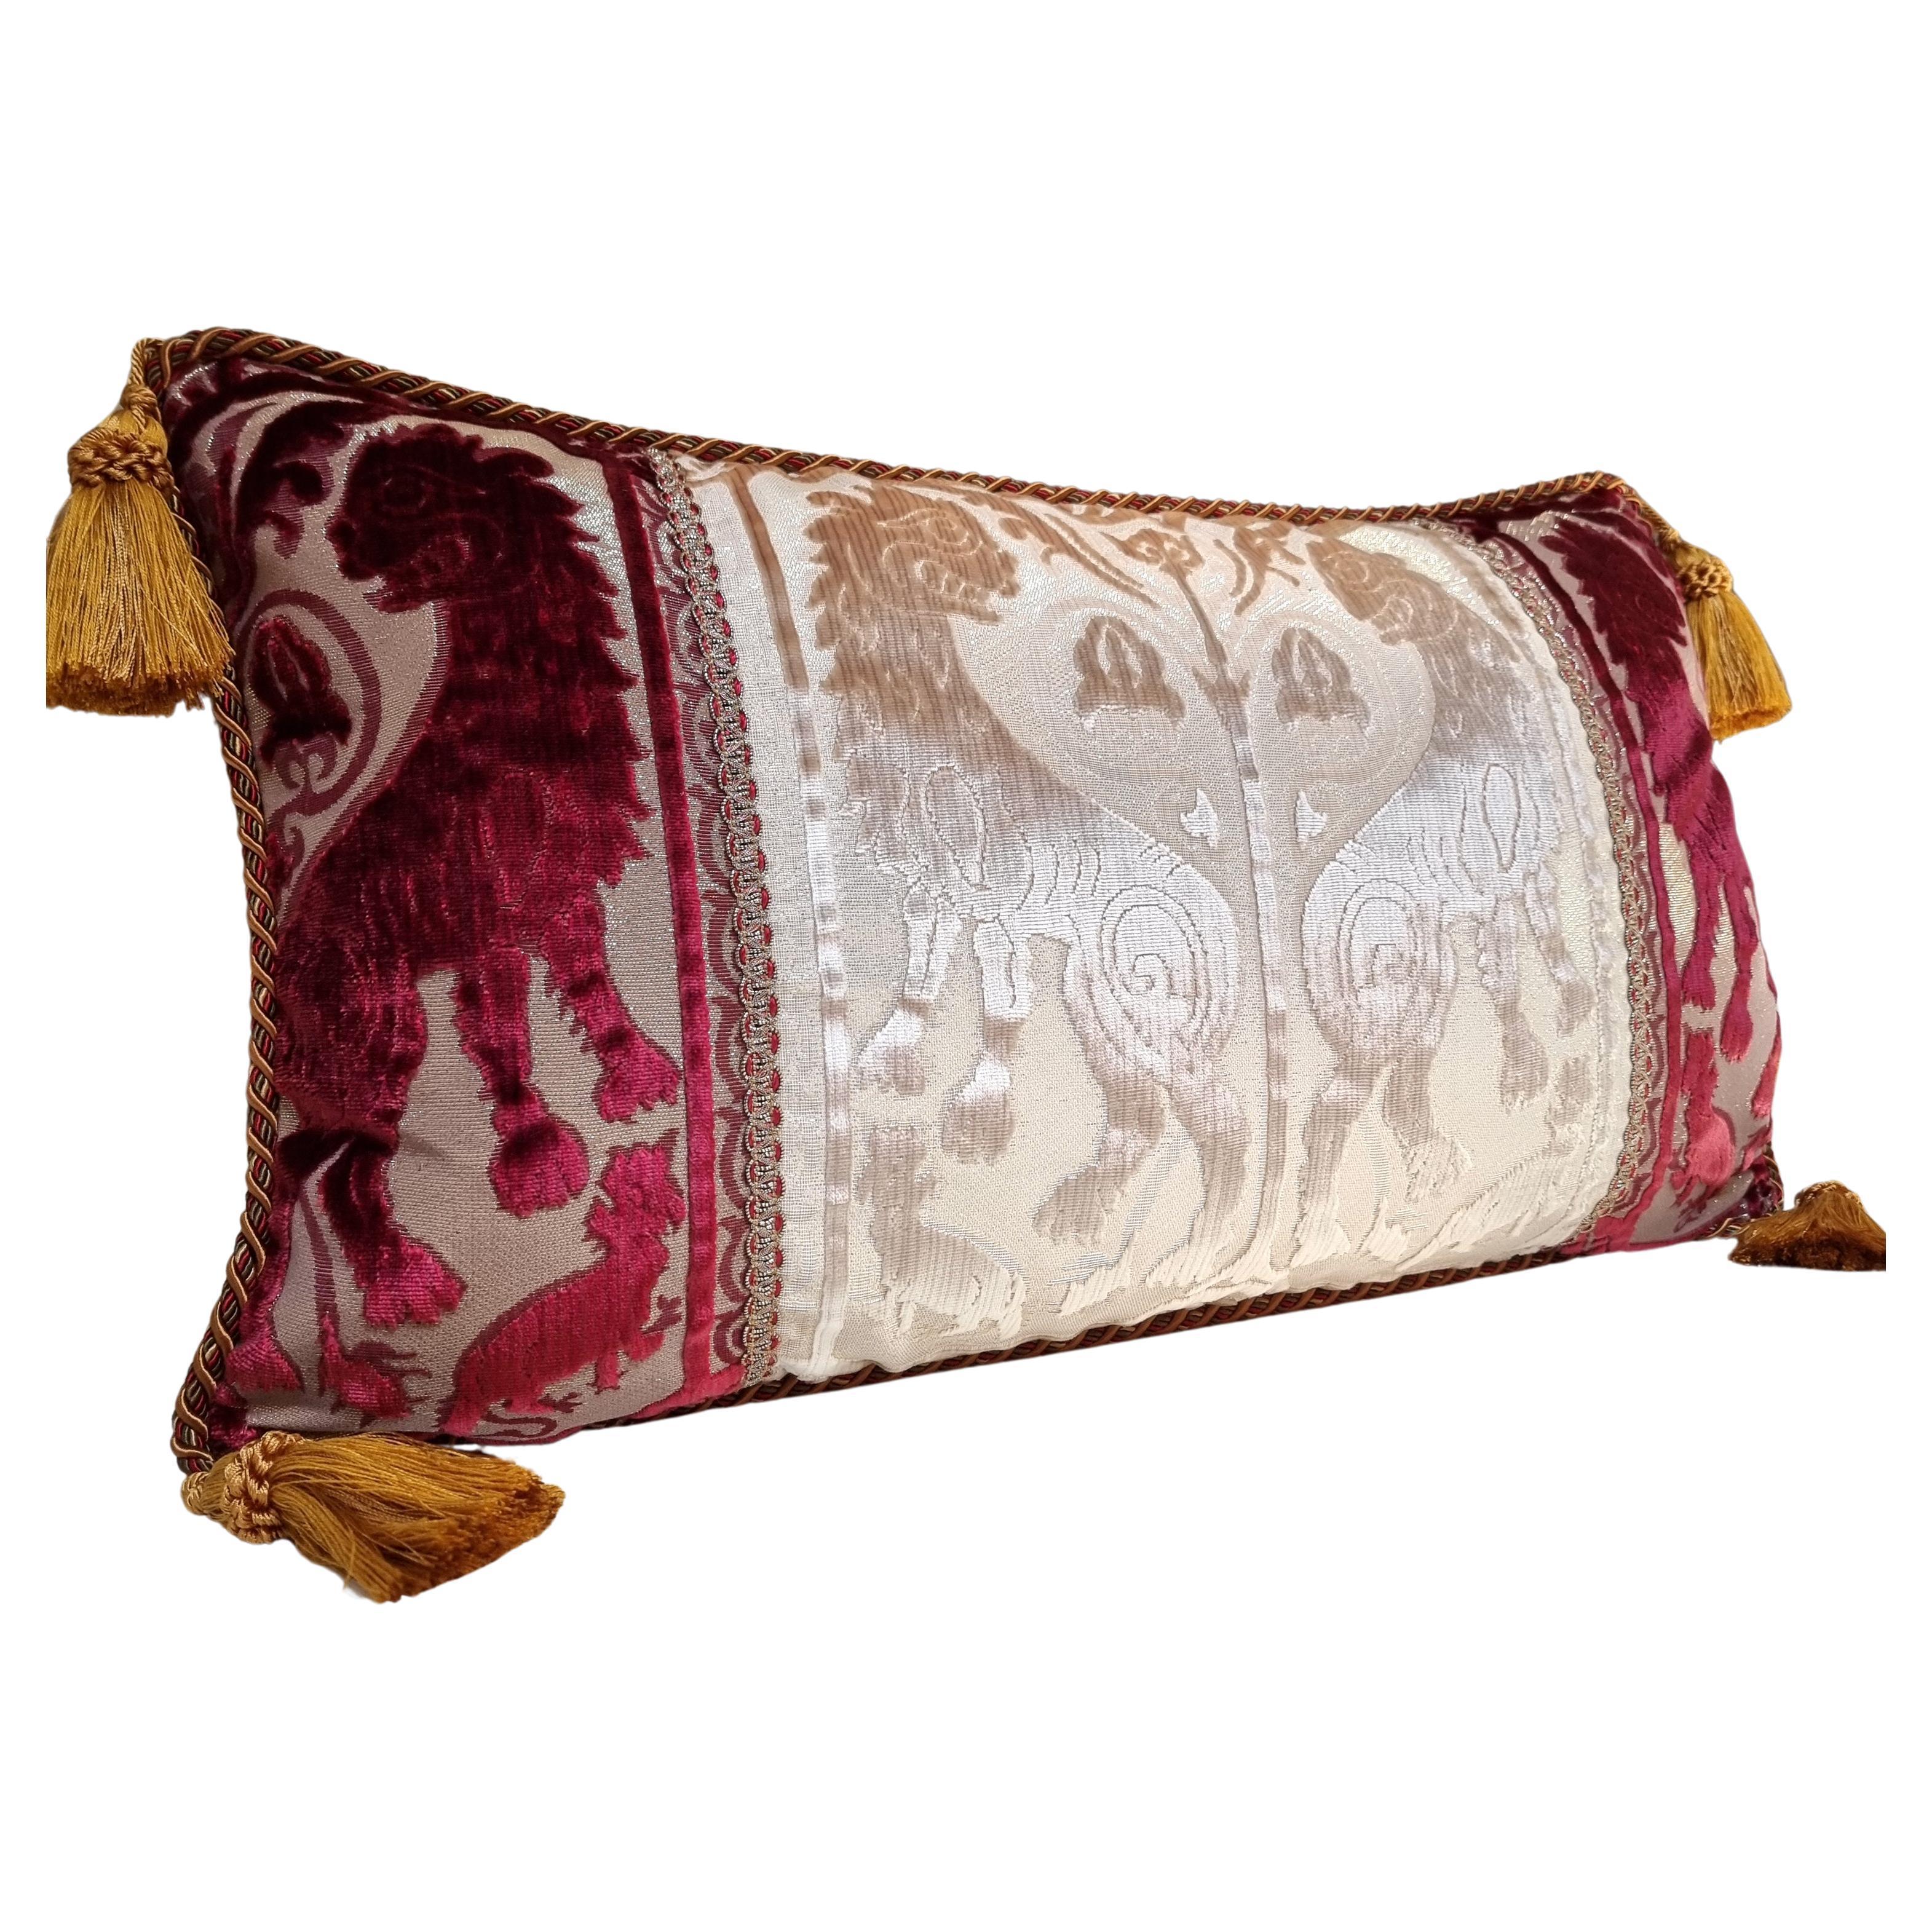 This amazing decorative lumbar pillow with gold tassel at the four corners is handmade using the iconic Leoni Bizantini - XII-XIV century design - silk heddle velvet in red and ivory color from 